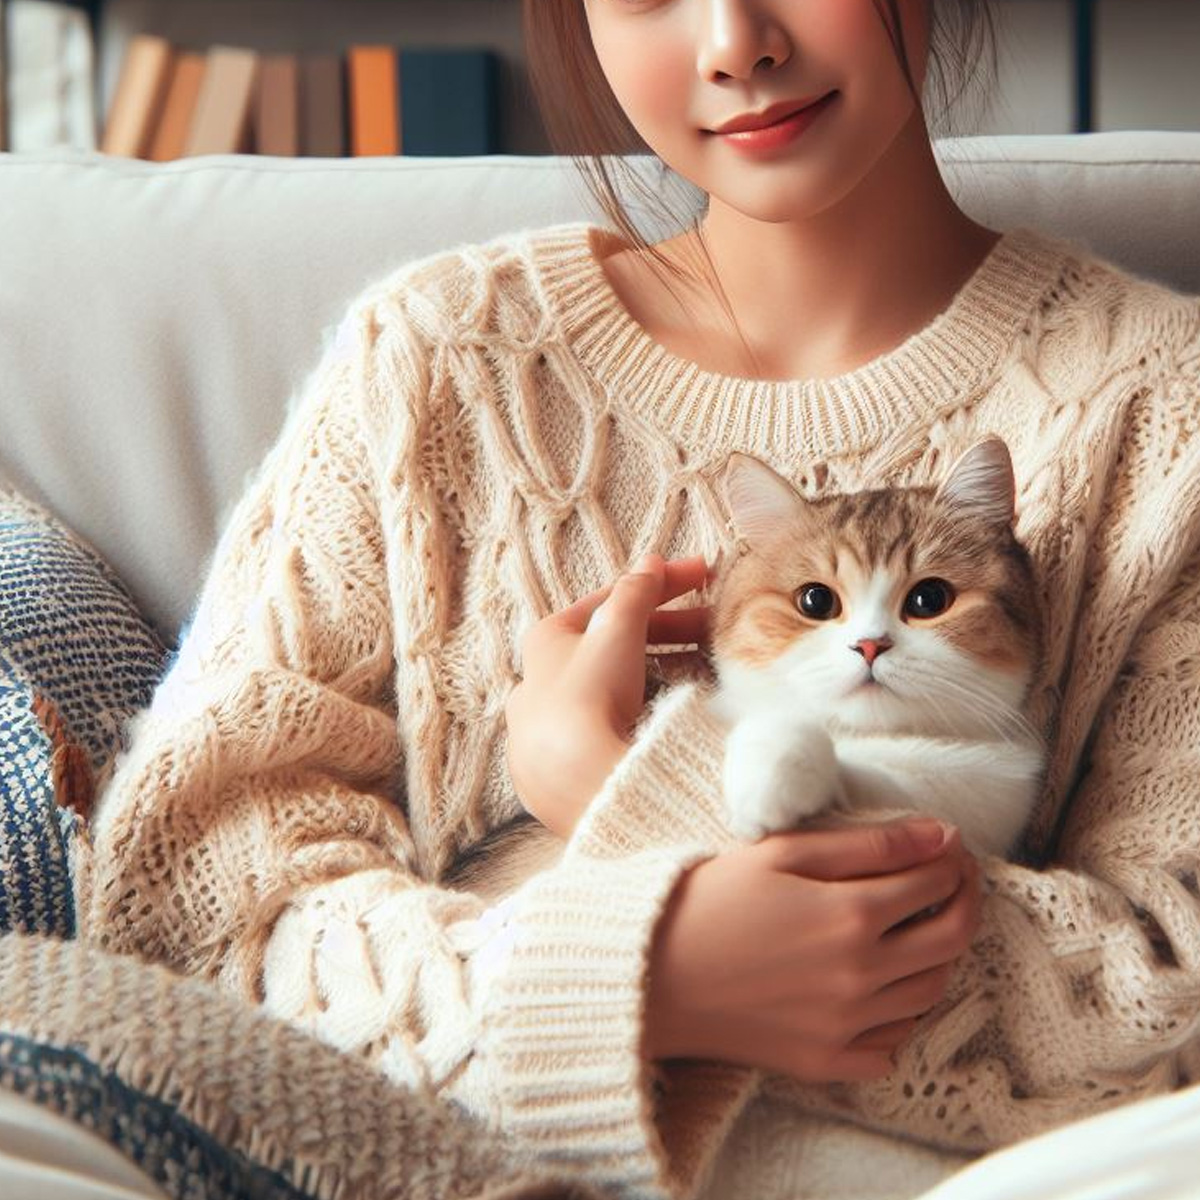 Your Guide to Cuddling Cats According to Experts